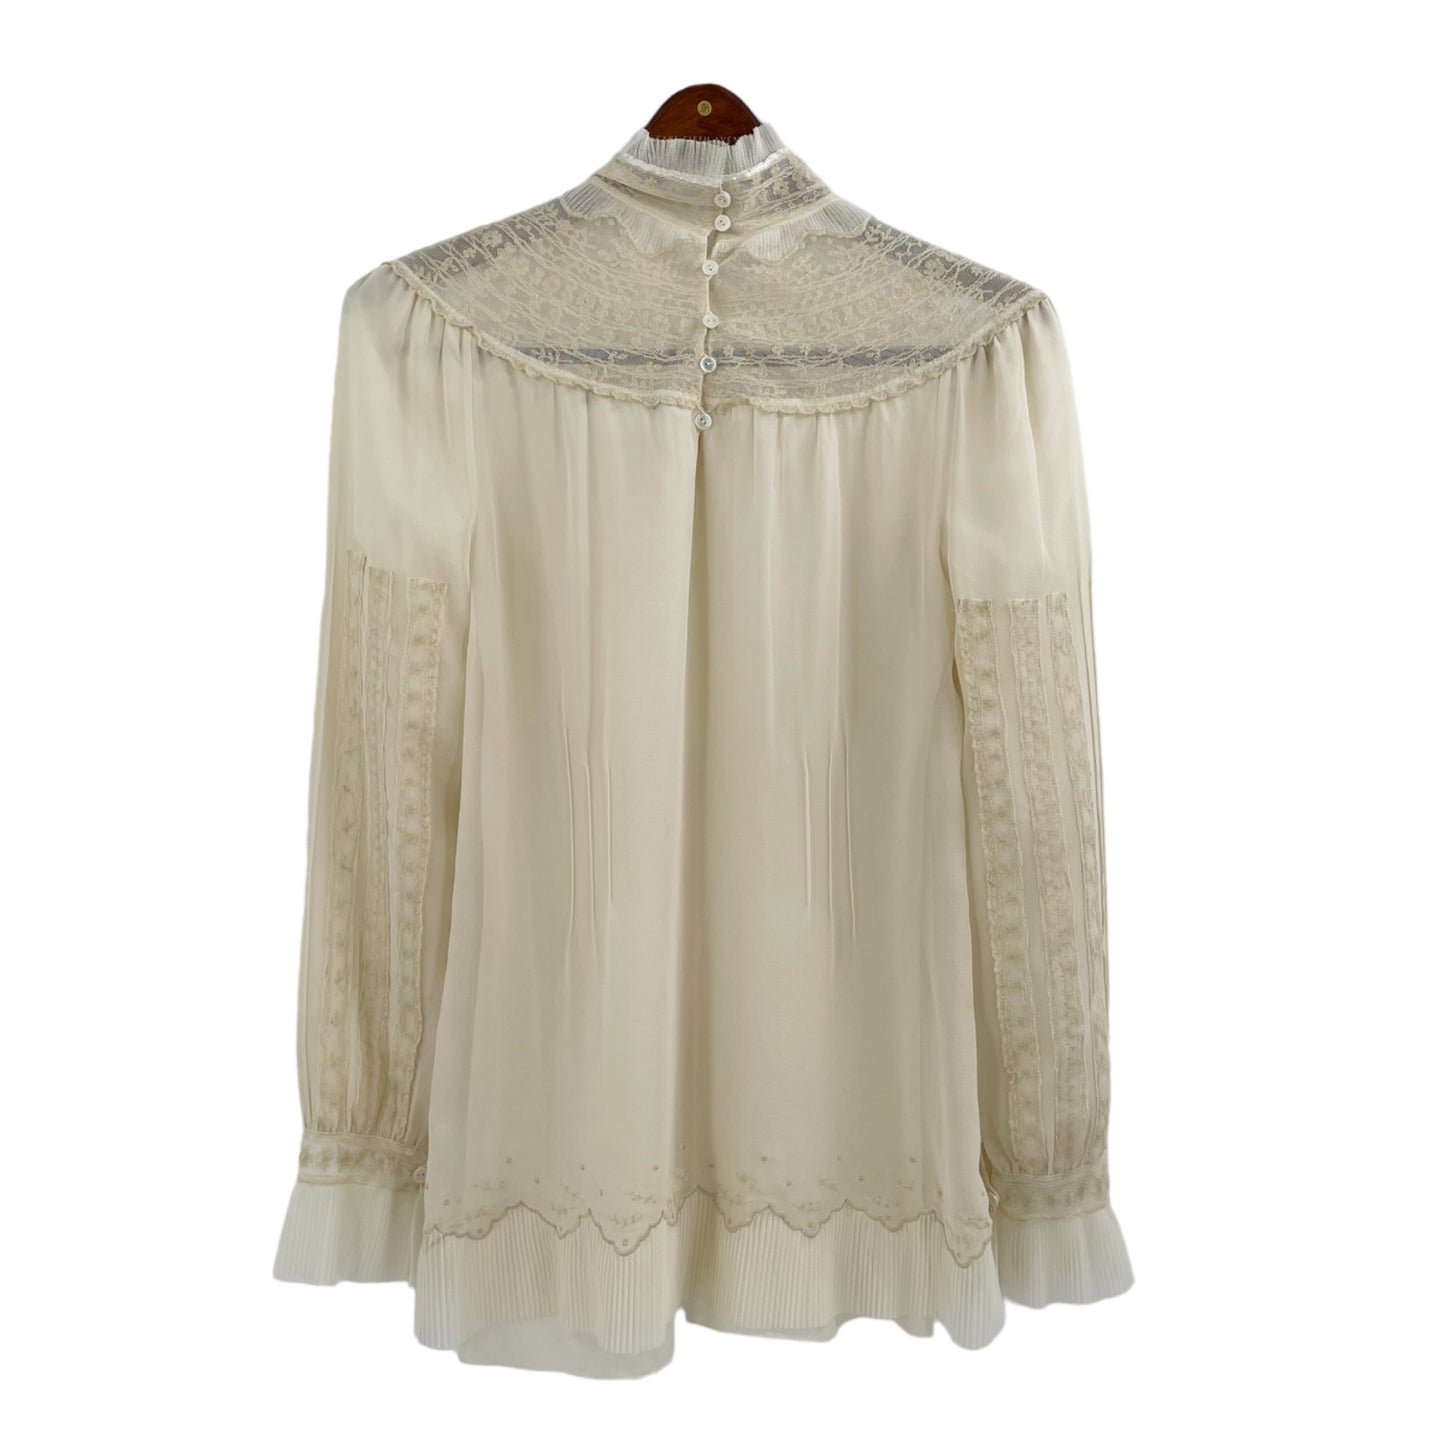 Peruvian Connection Ivory 100% Silk Long Sleeve Embroidered Blouse Womens Size 6